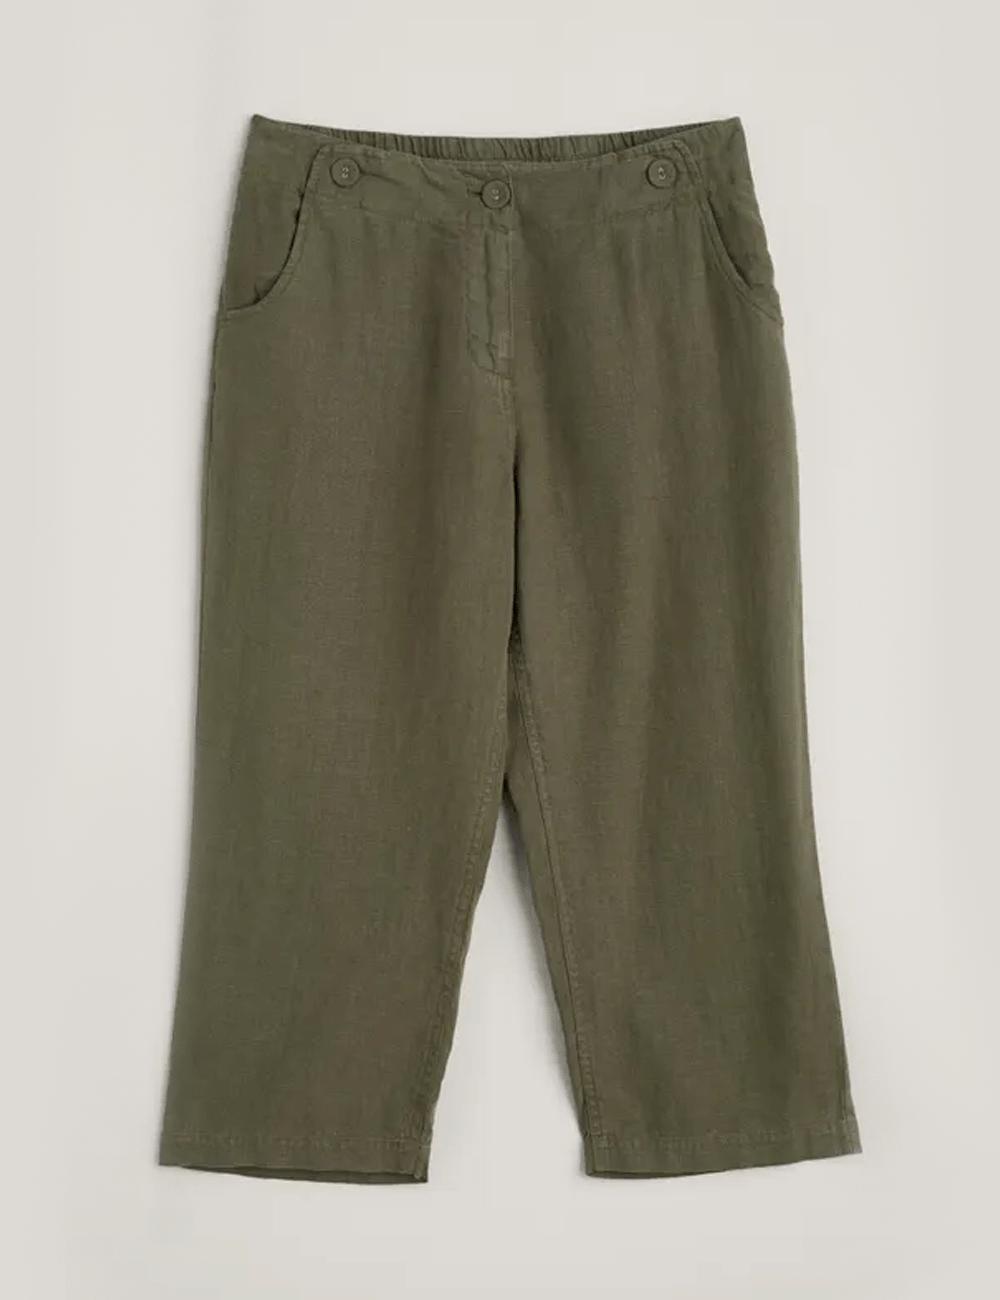 Seasalt's Brawn Point Crops in Light Olive on a grey background